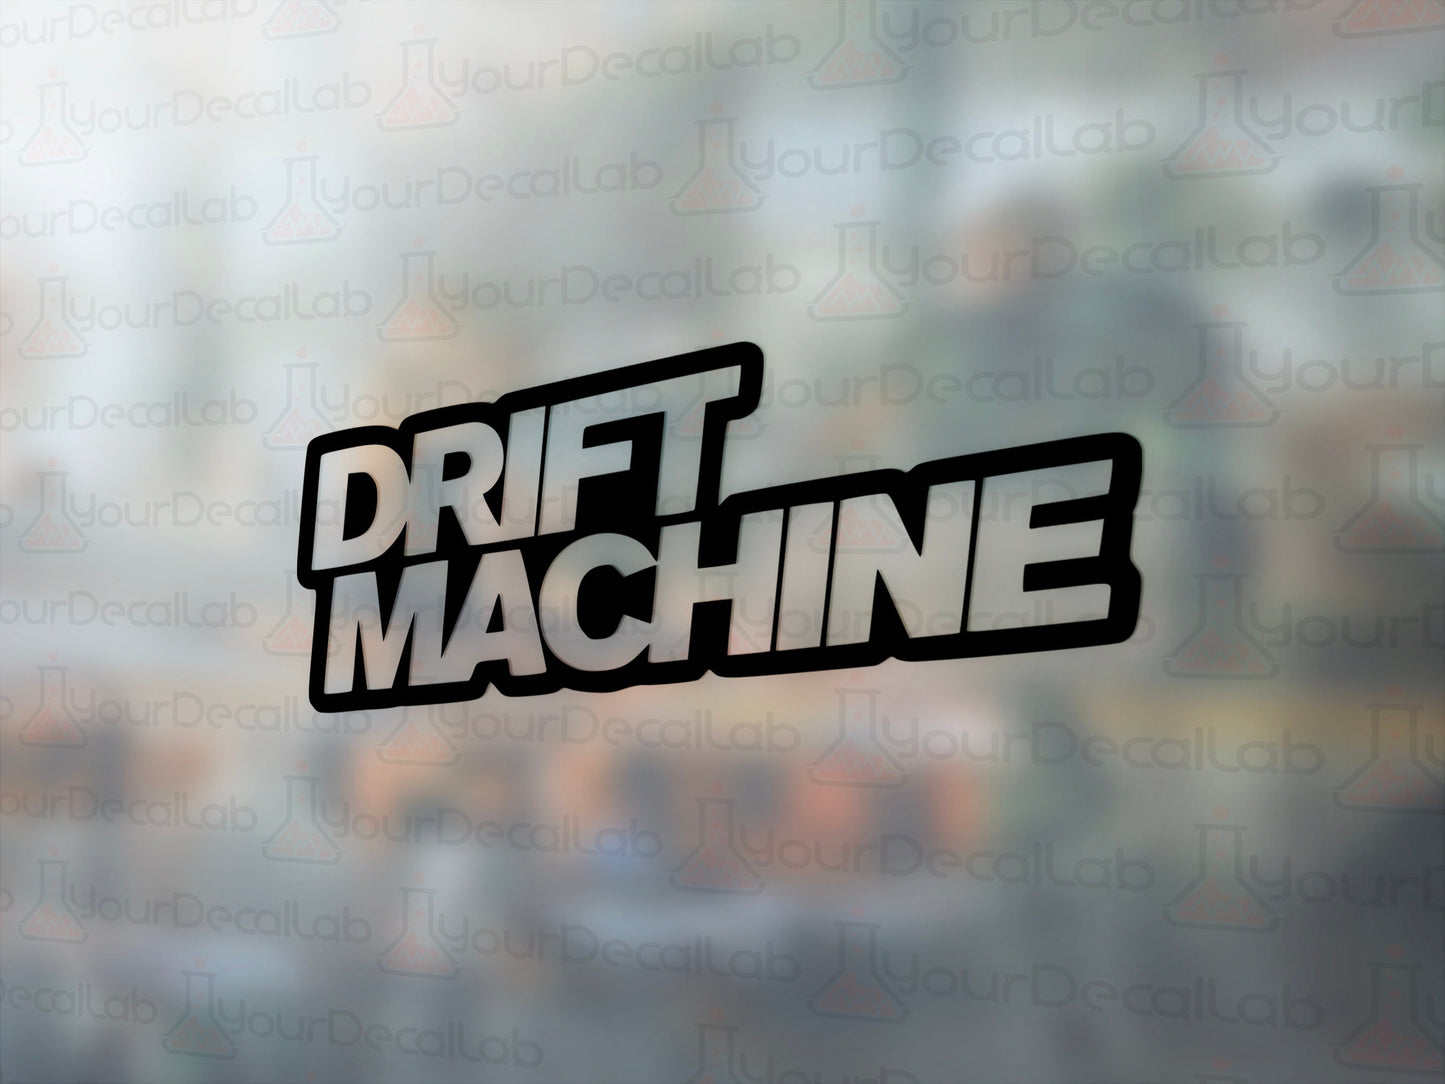 Drift Machine Decal - Many Colors & Sizes